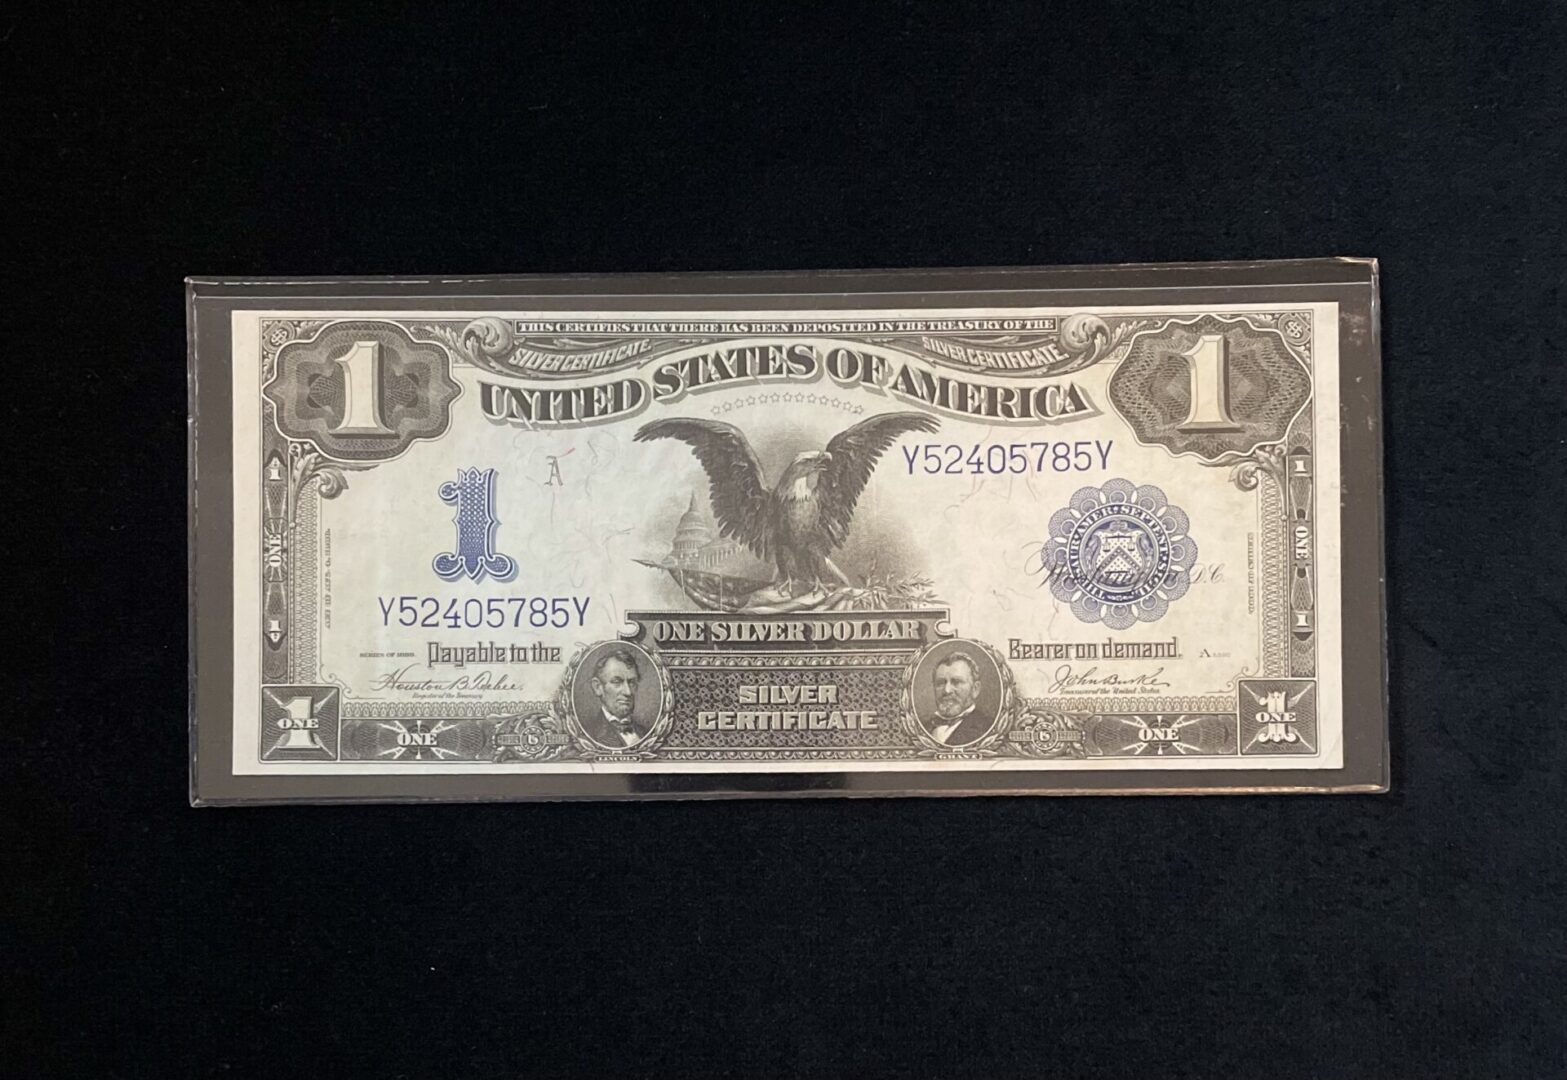 A picture of the back side of an old one dollar bill.